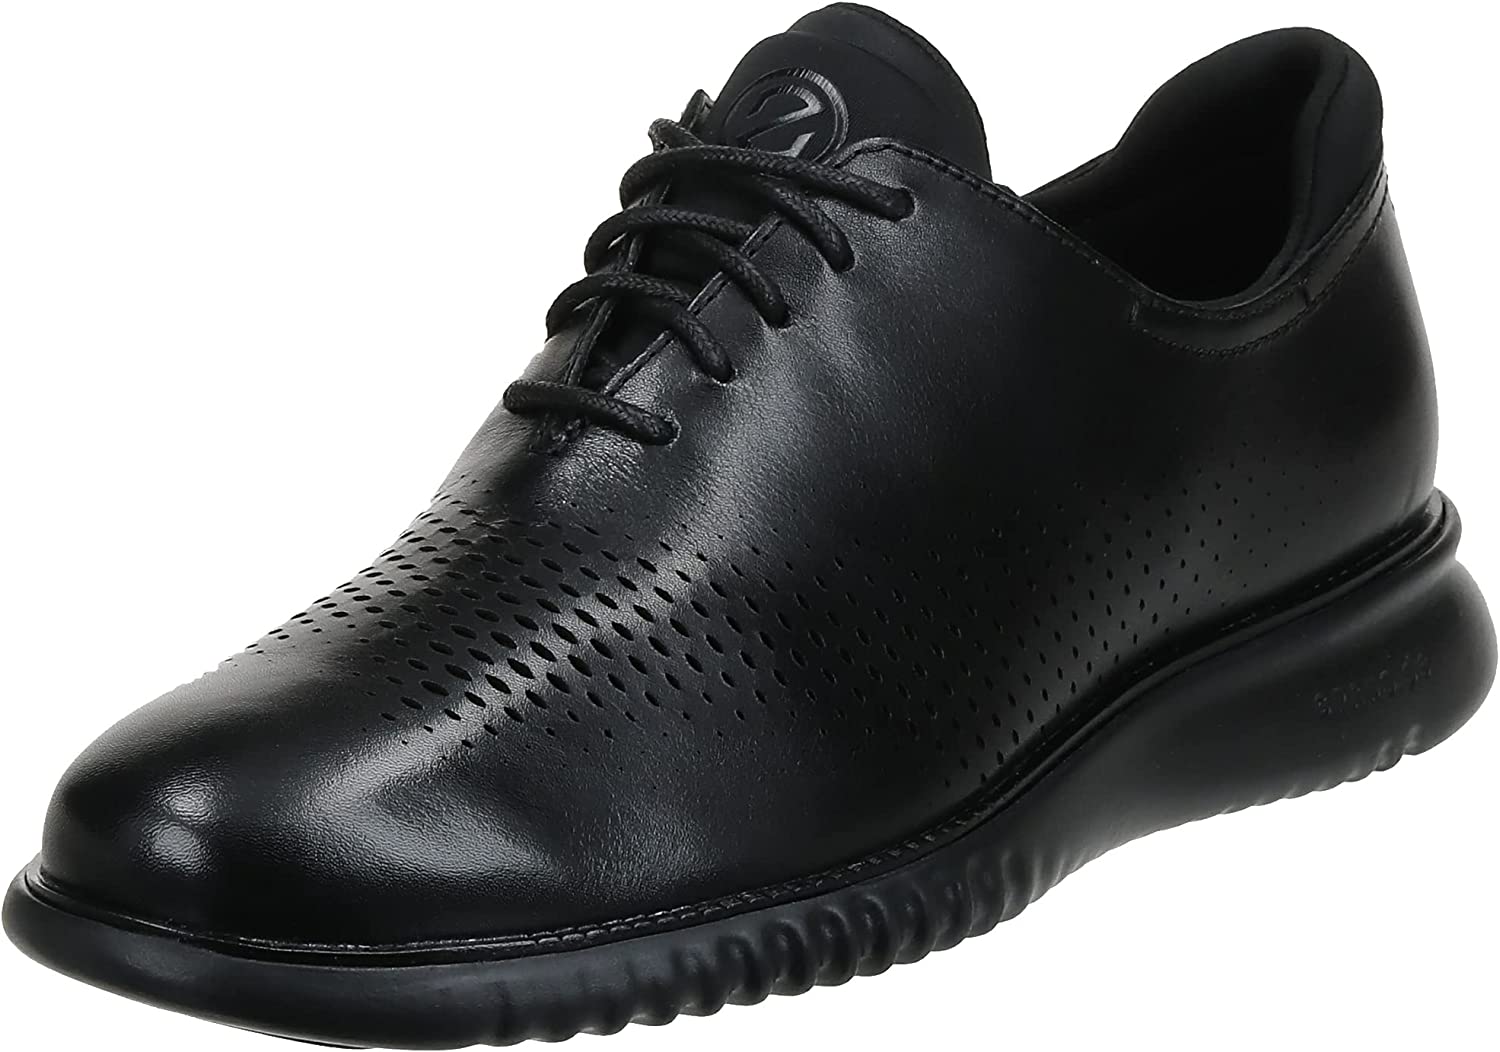 mens dress shoes for standing all day product review